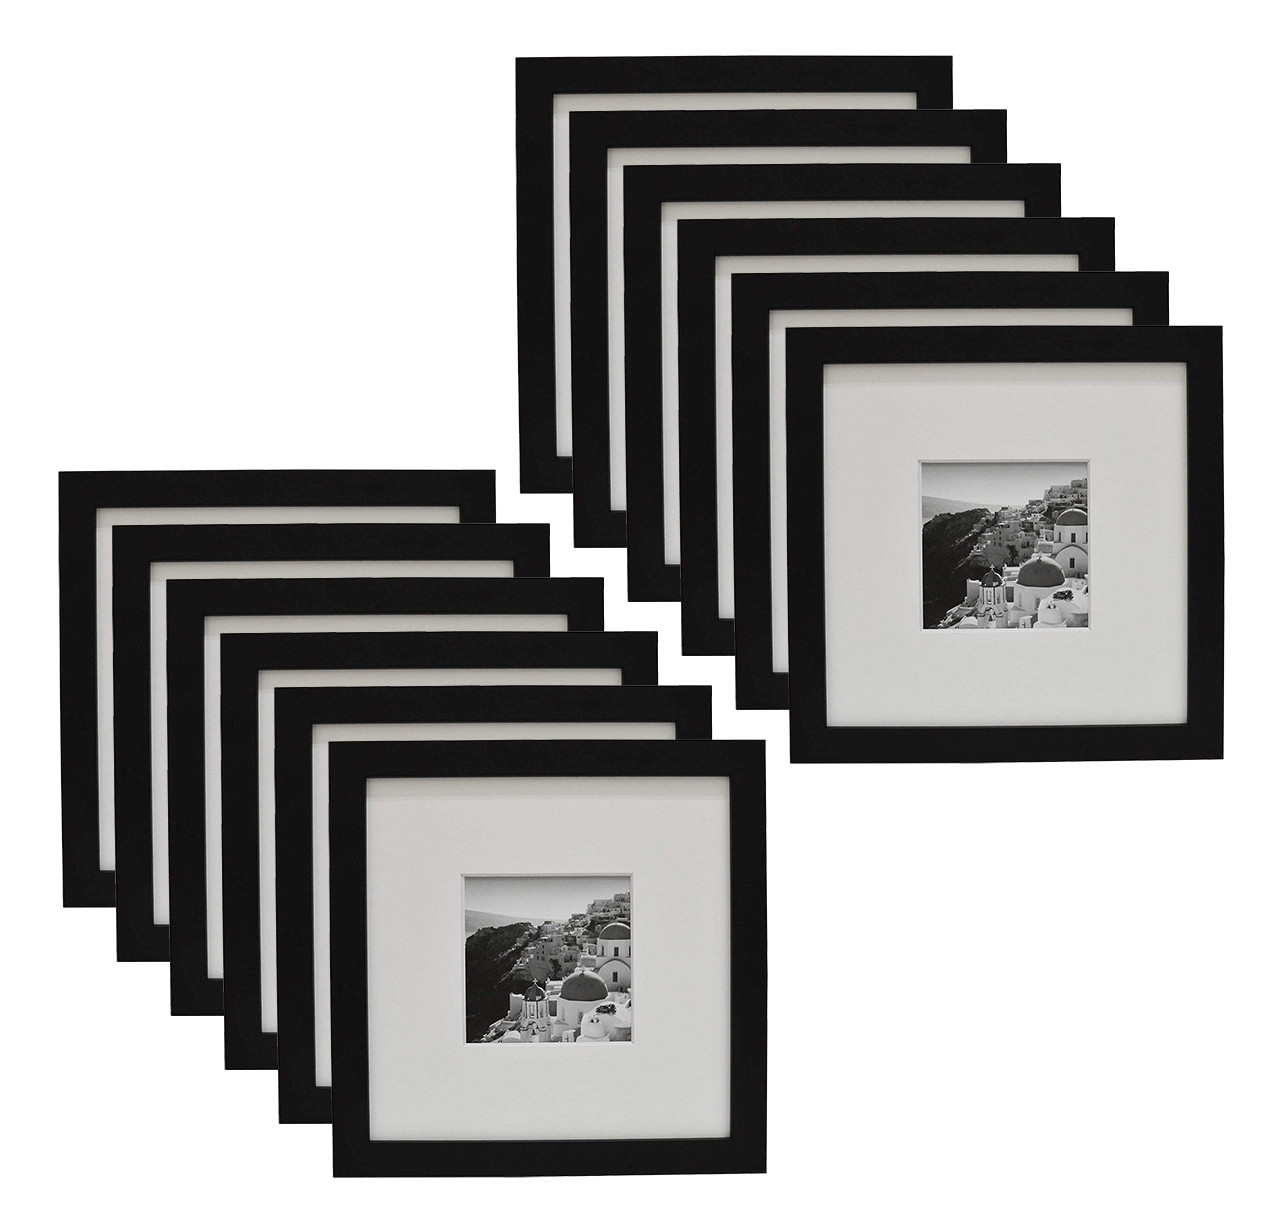 Details about   8x8 Soild Wood Picture Frame with High Definition Glass Display Pictures 4x4 ... 